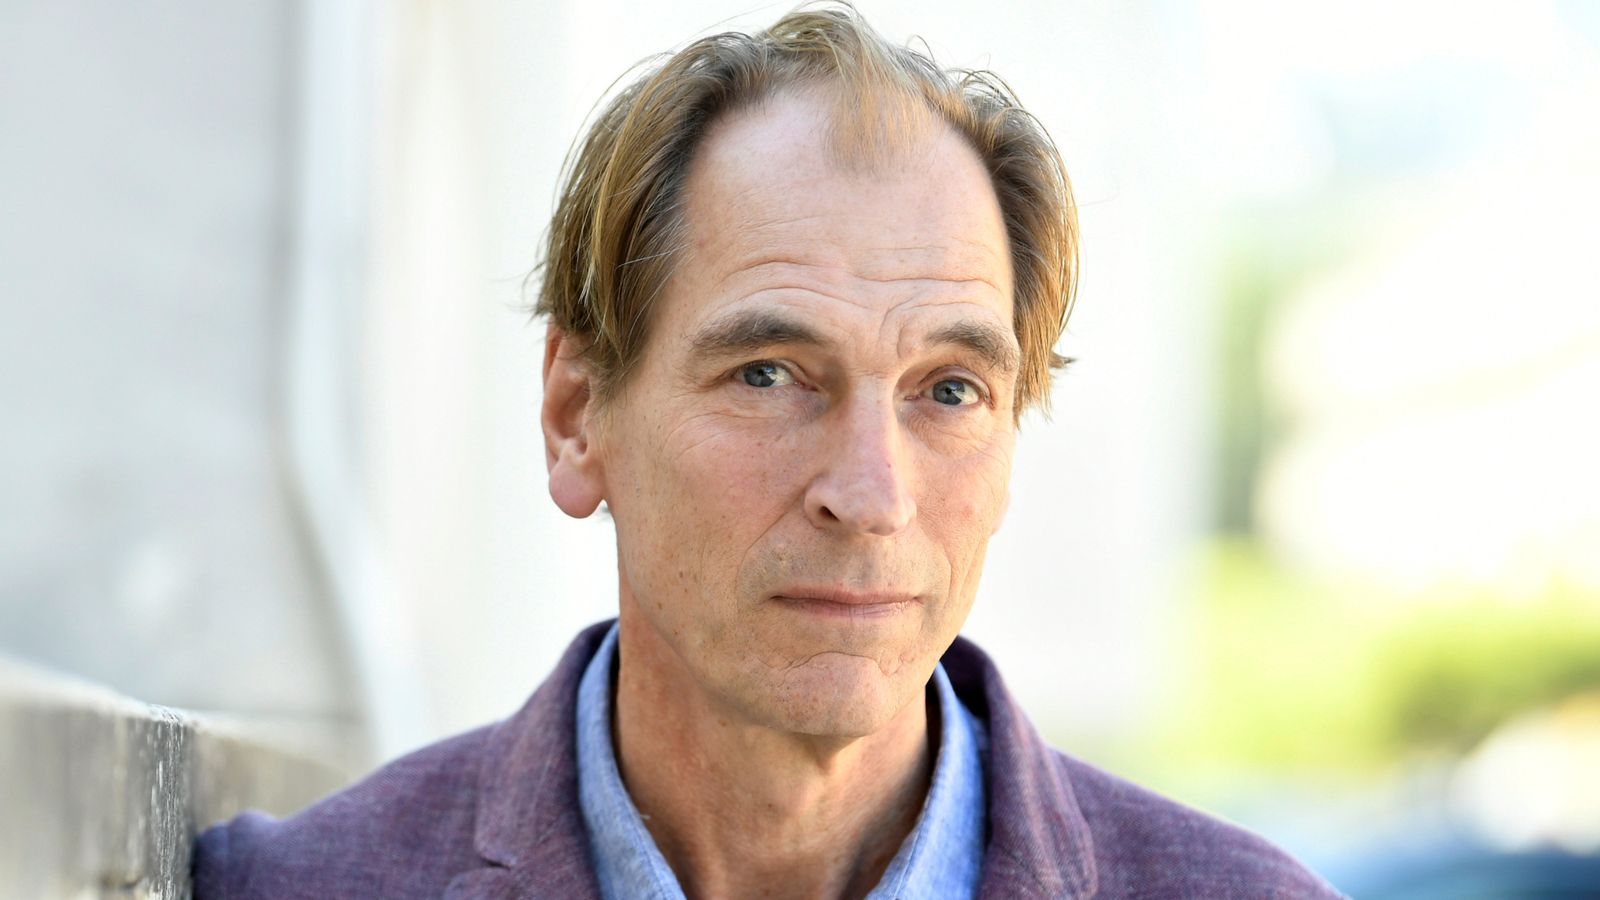 Julian Sands search: Human remains found in California mountains where British actor disappeared